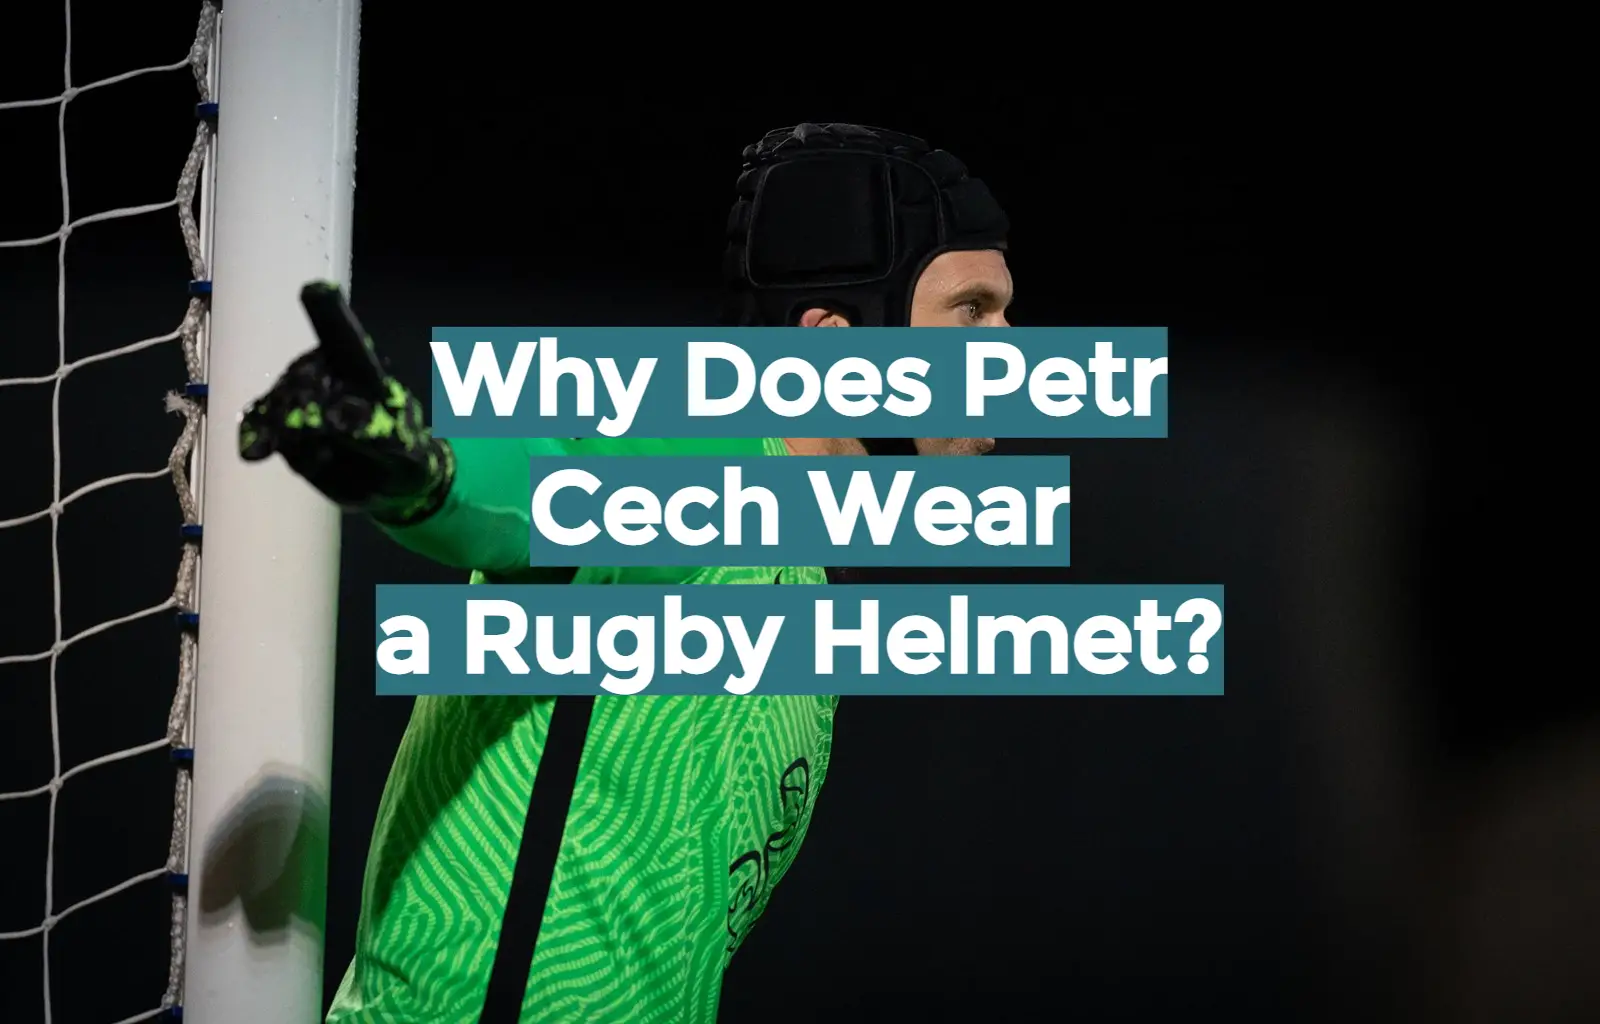 Why Does Petr Cech Wear a Rugby Helmet?